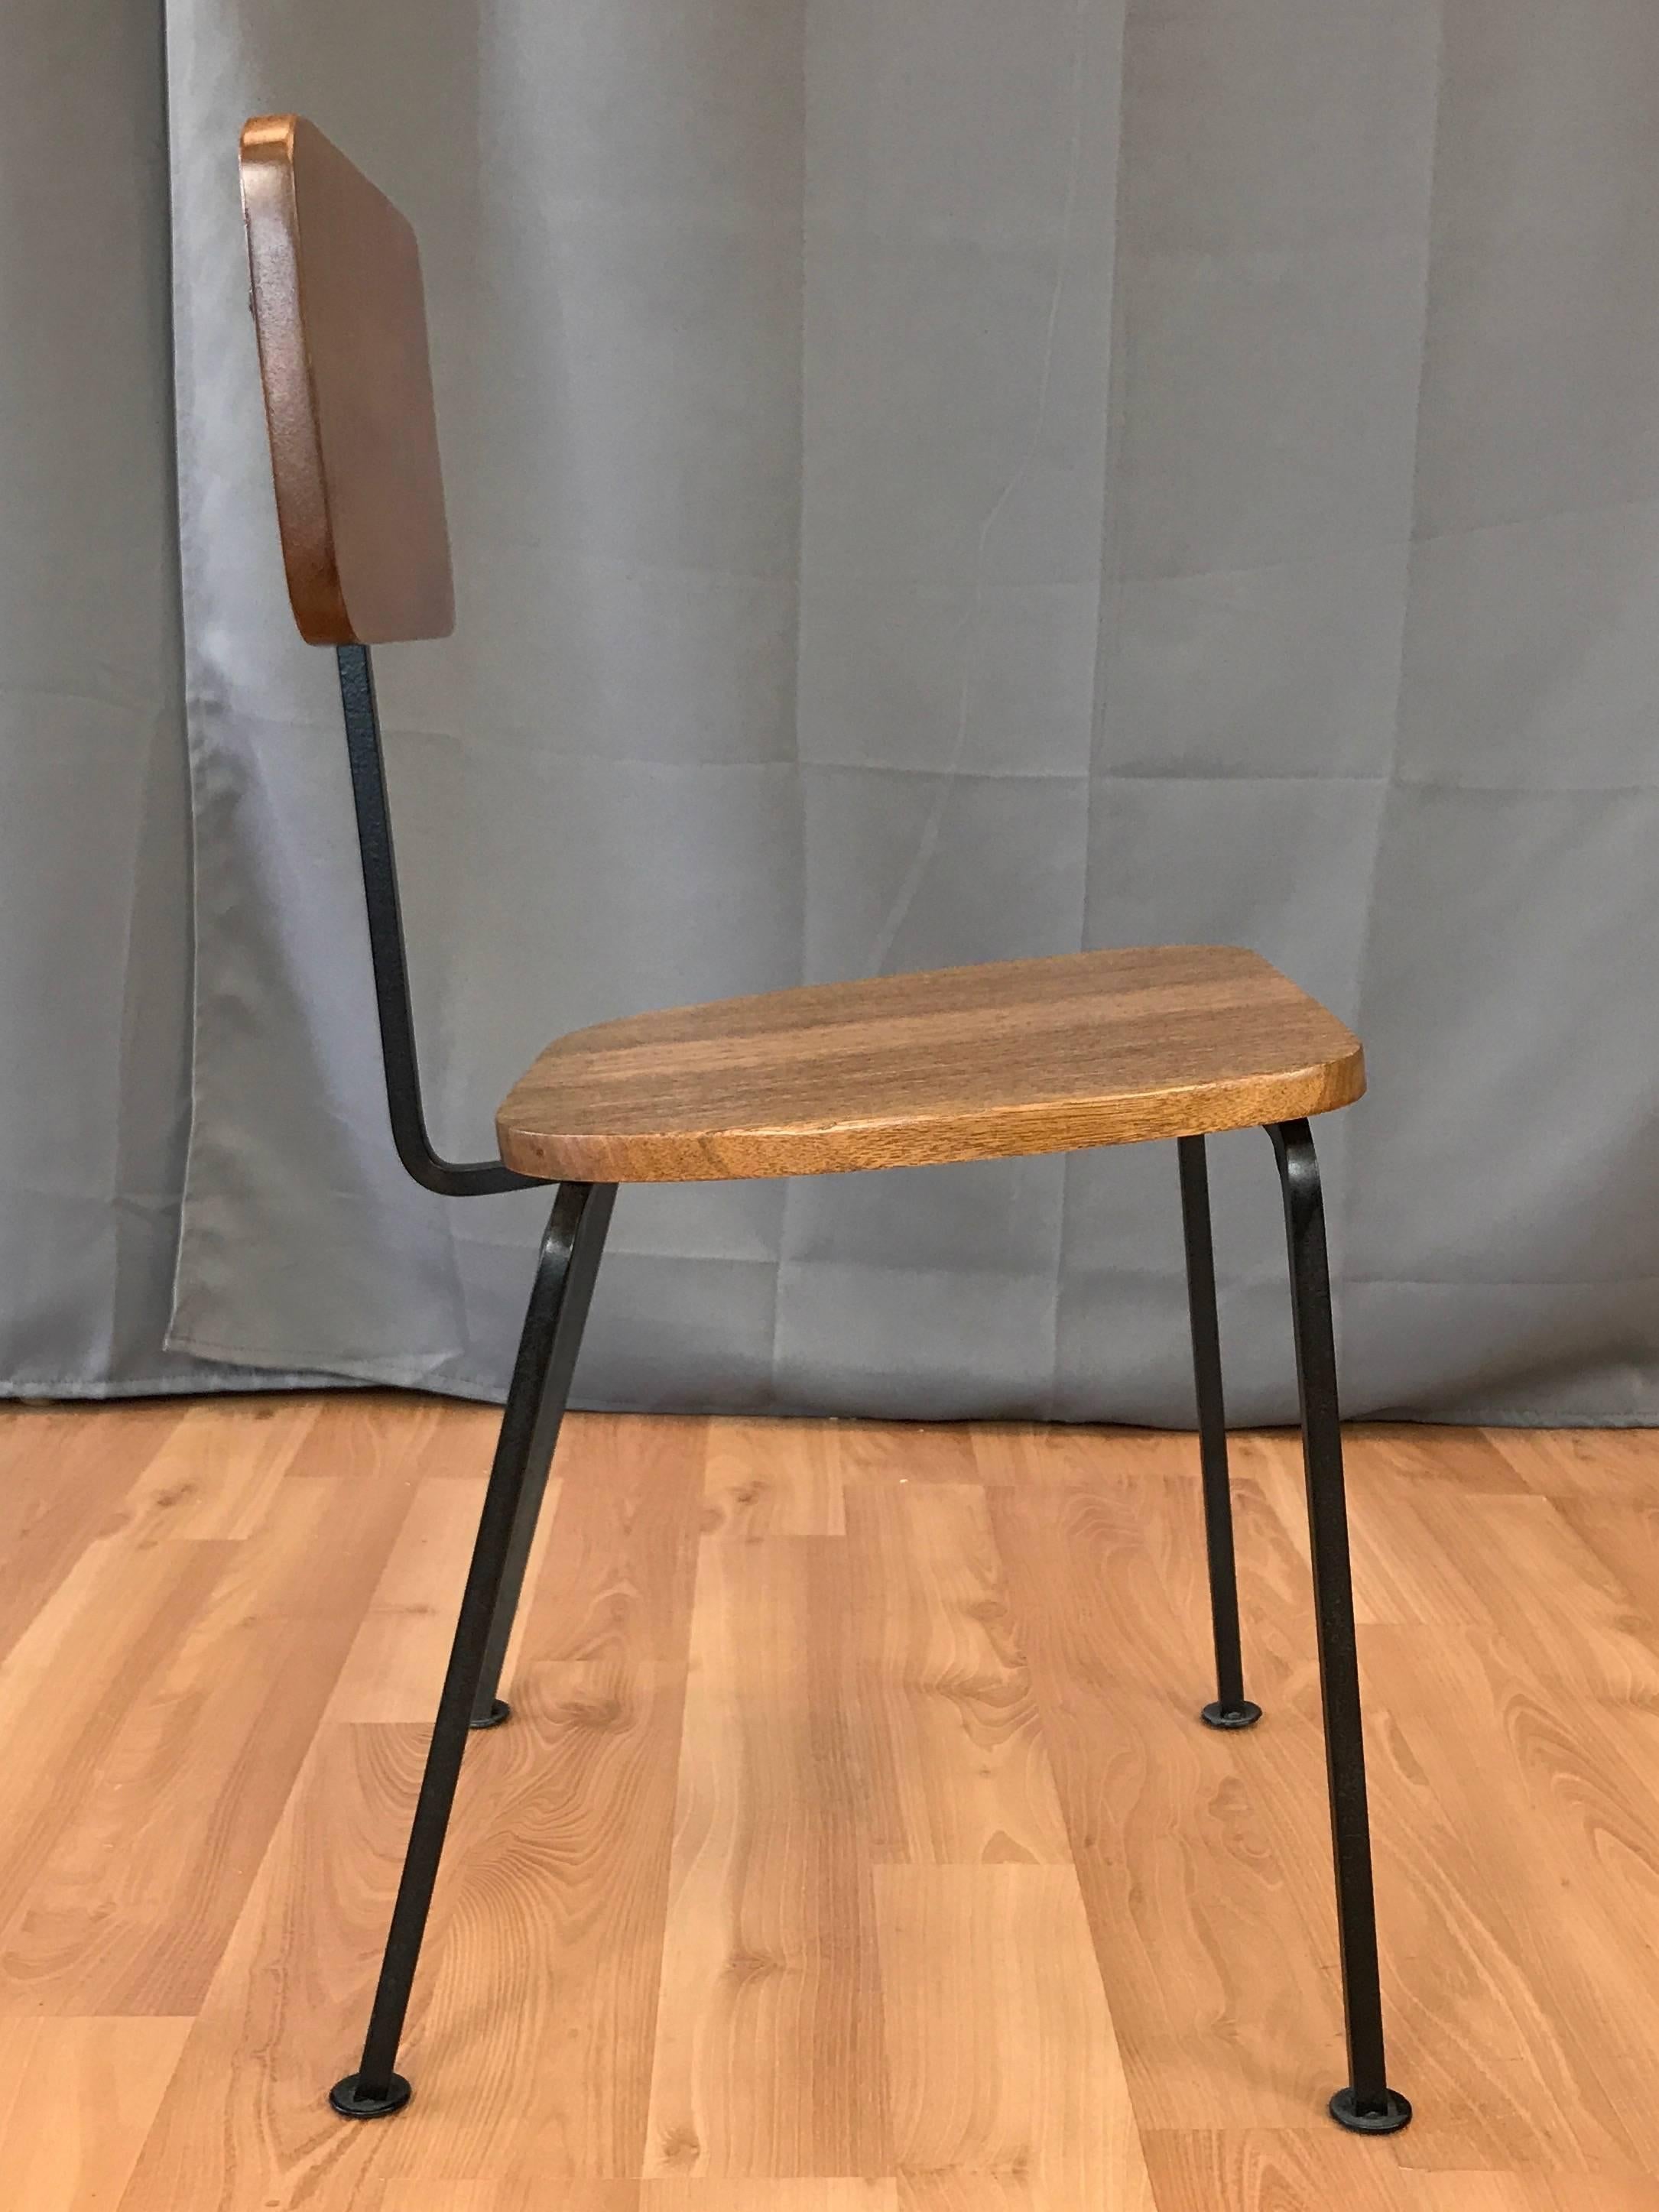 An uncommon Mid-Century Modern side chair in mahogany and enameled steel by Luther Conover.

The side chair expertly distilled to its bare essence, with a minimal form that exudes maximal charm. Solid mahogany seat and back with heavily ticked